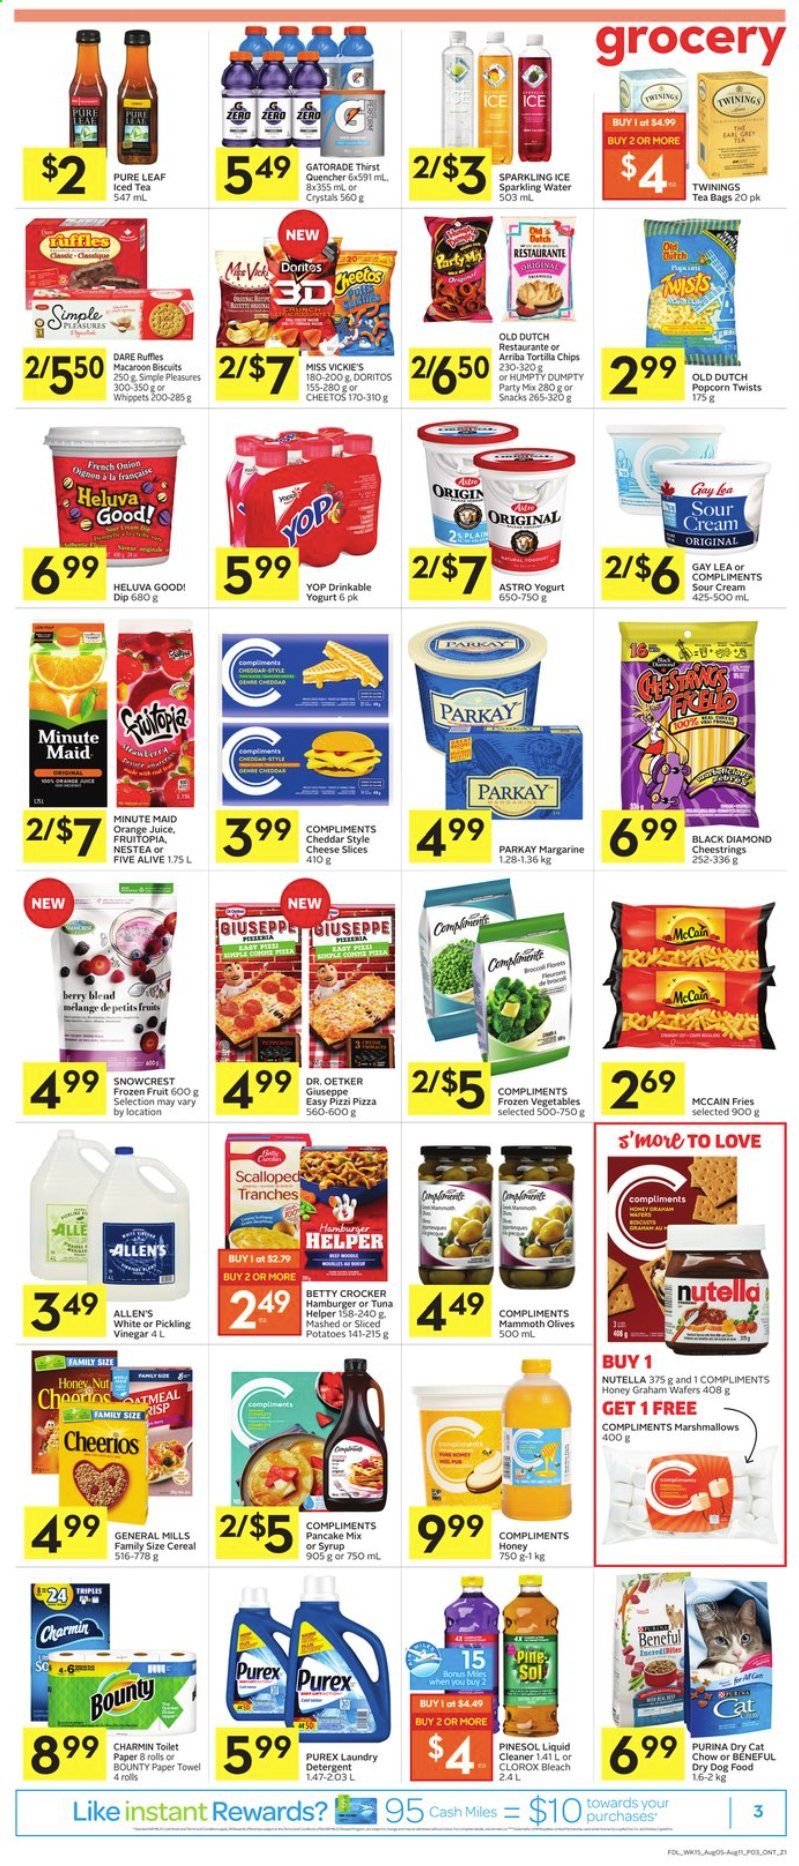 thumbnail - Circulaire Foodland - 05 Août 2021 - 11 Août 2021 - Produits soldés - biscuits, chips, tortilla chips, olives, Nutella. Page 3.